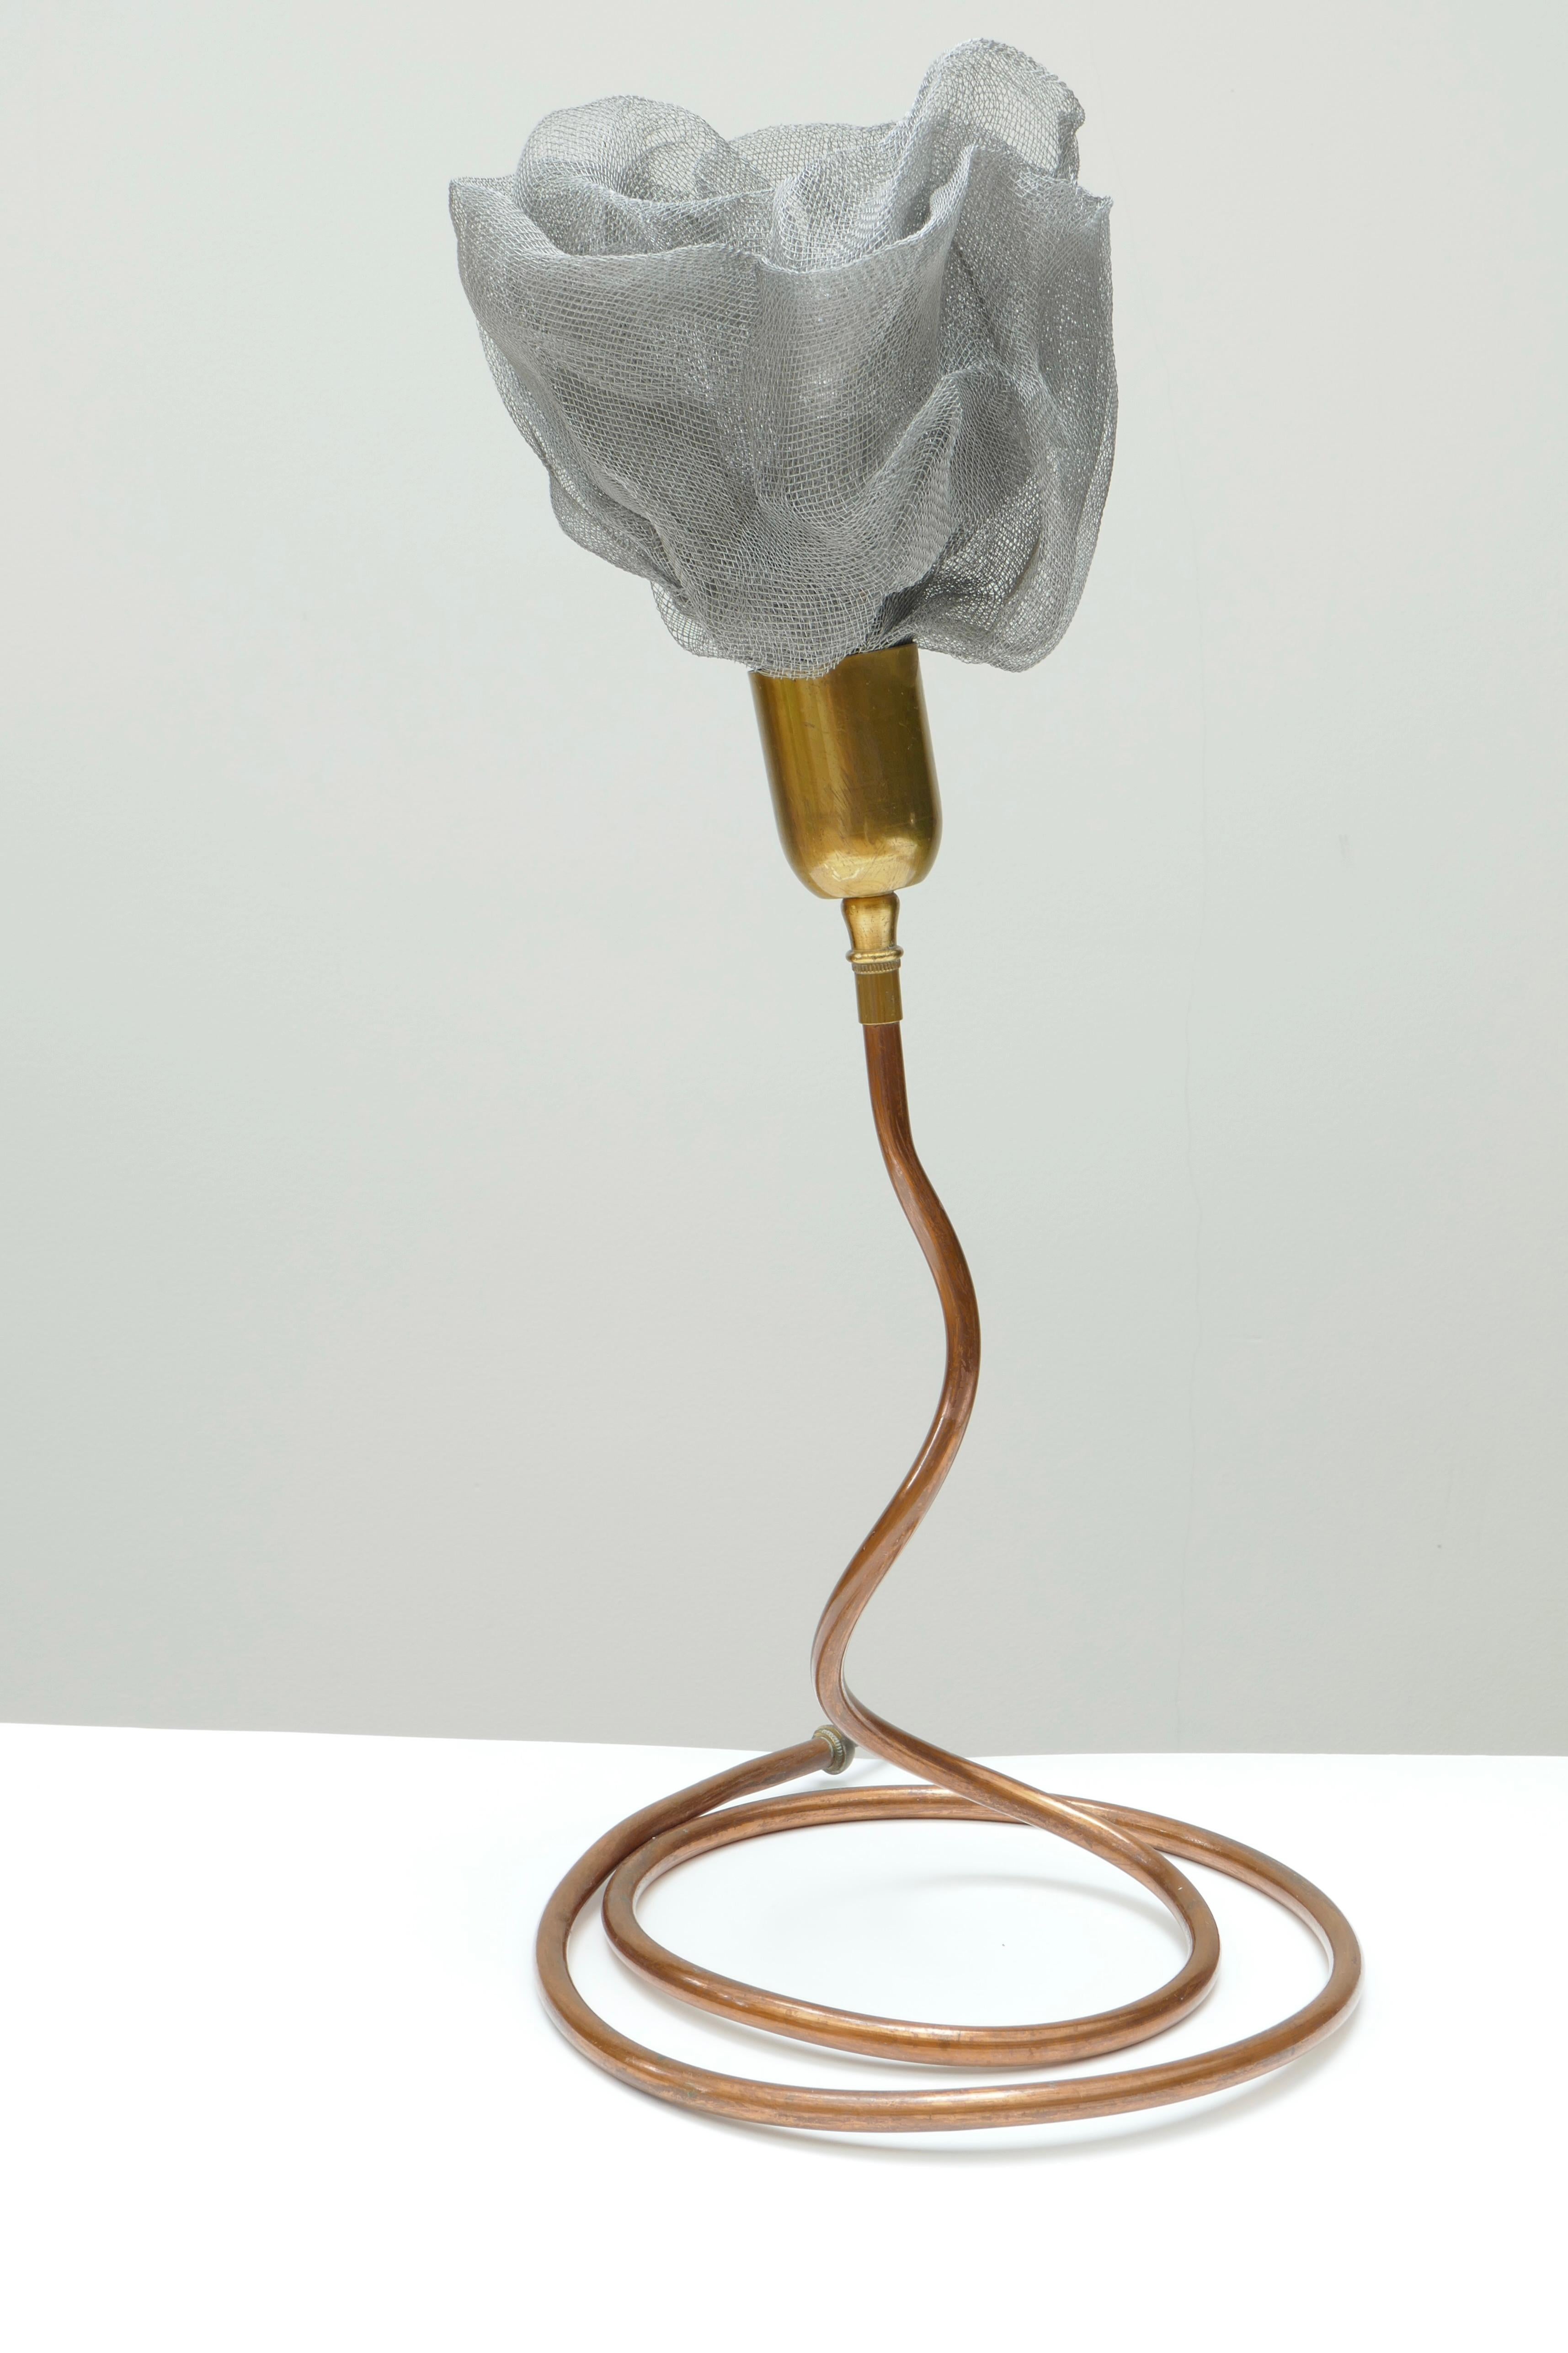 A unique and original table lamp with a serpent or flexible copper base and stem and a lamp holder shaped as a flower. The flower is made of woven mesh metal or tulle. The sepal of the flower is in brass.
The copper base has a diameter of 24 cm